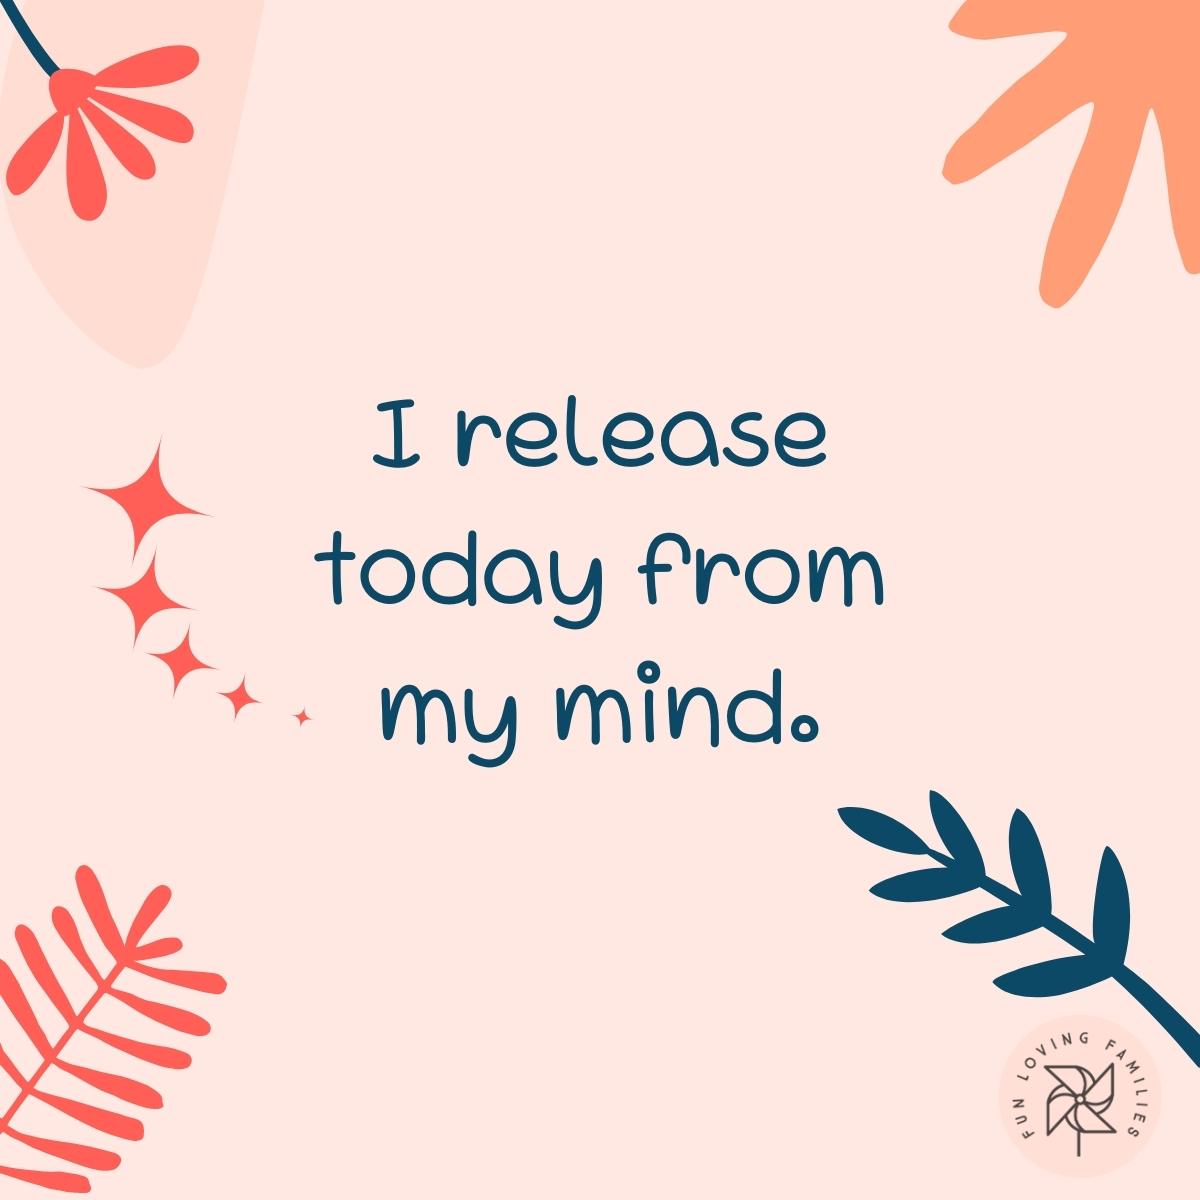 I release today from my mind affirmation